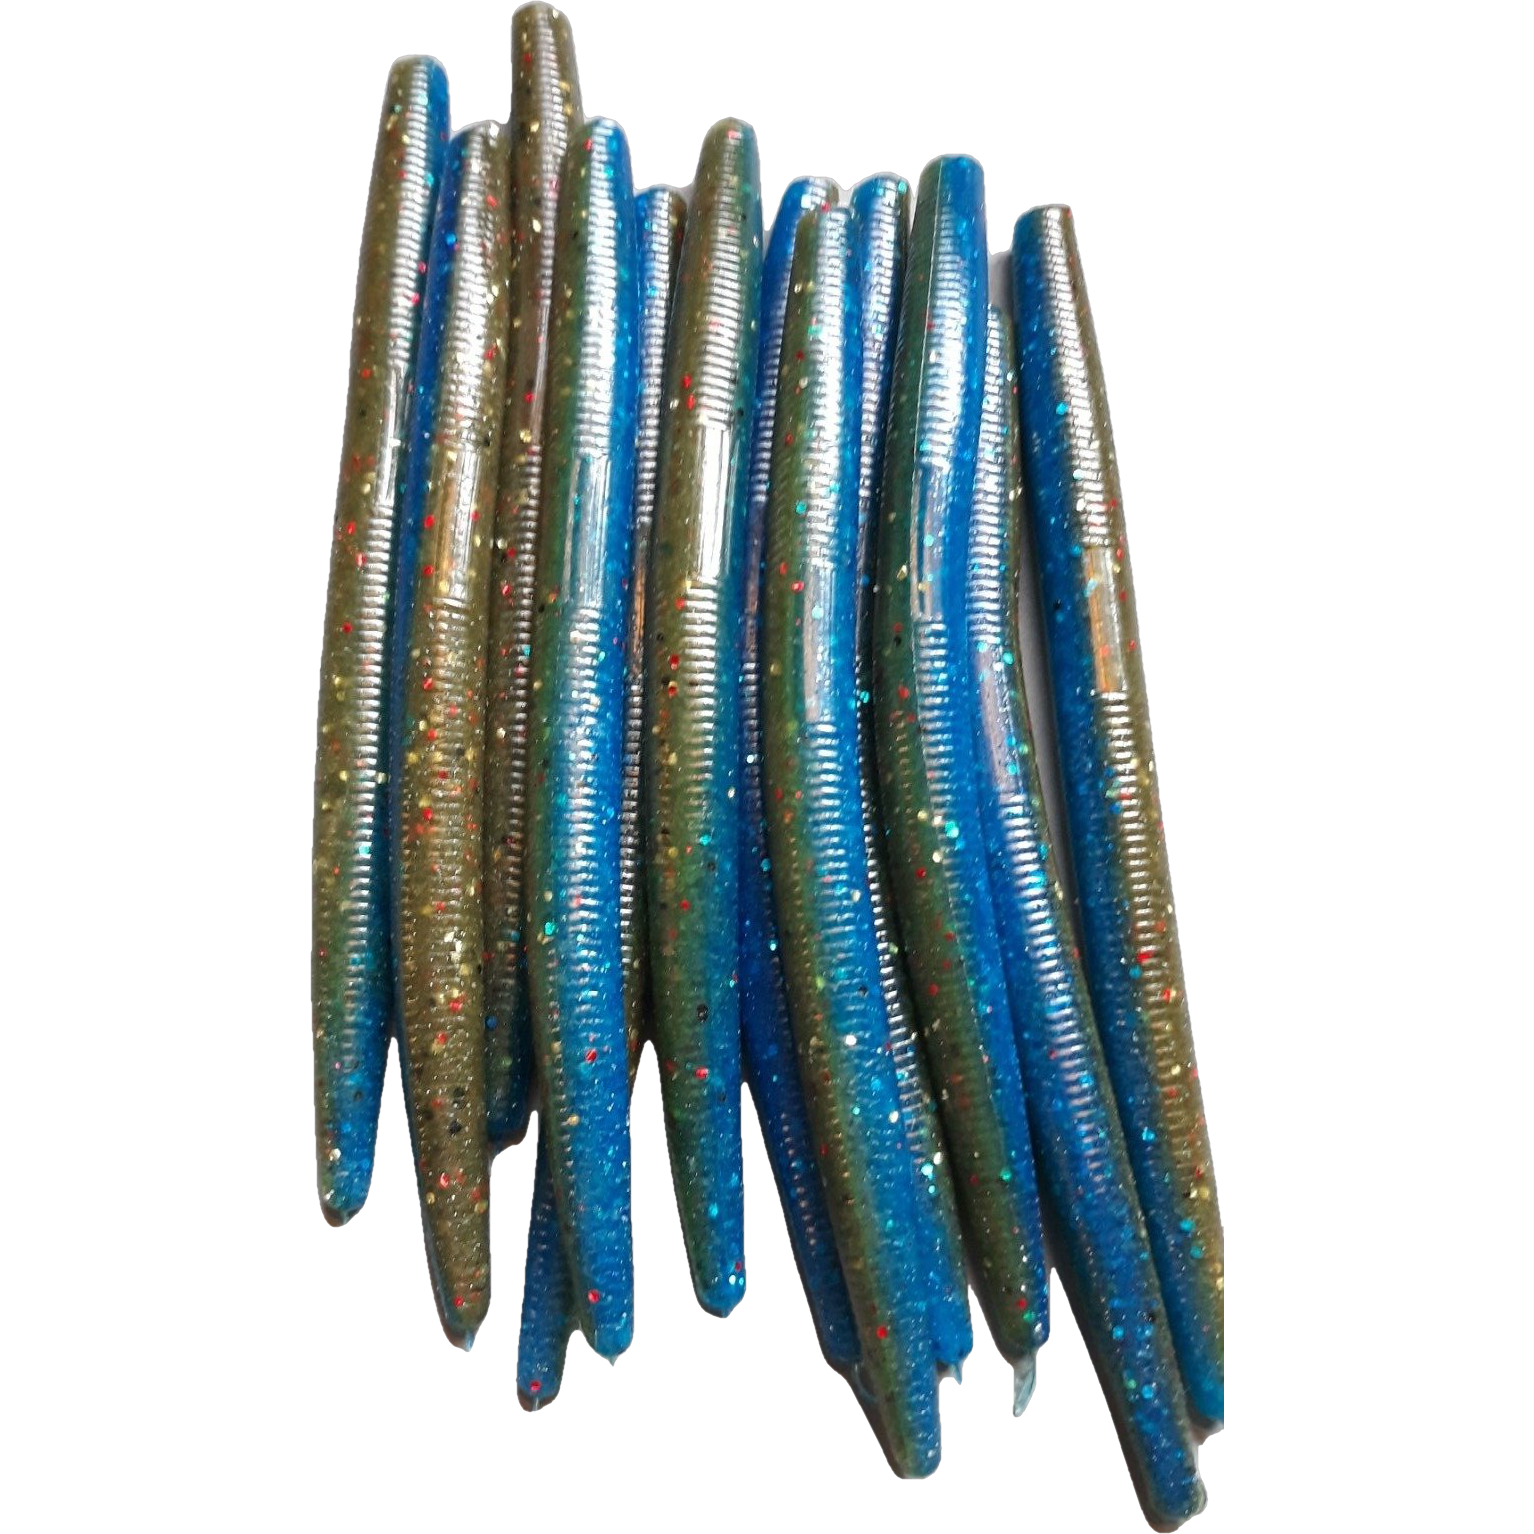 Atsuim Abalone Shell Stick Baits Treble Hooks 65g Top Water Wooden